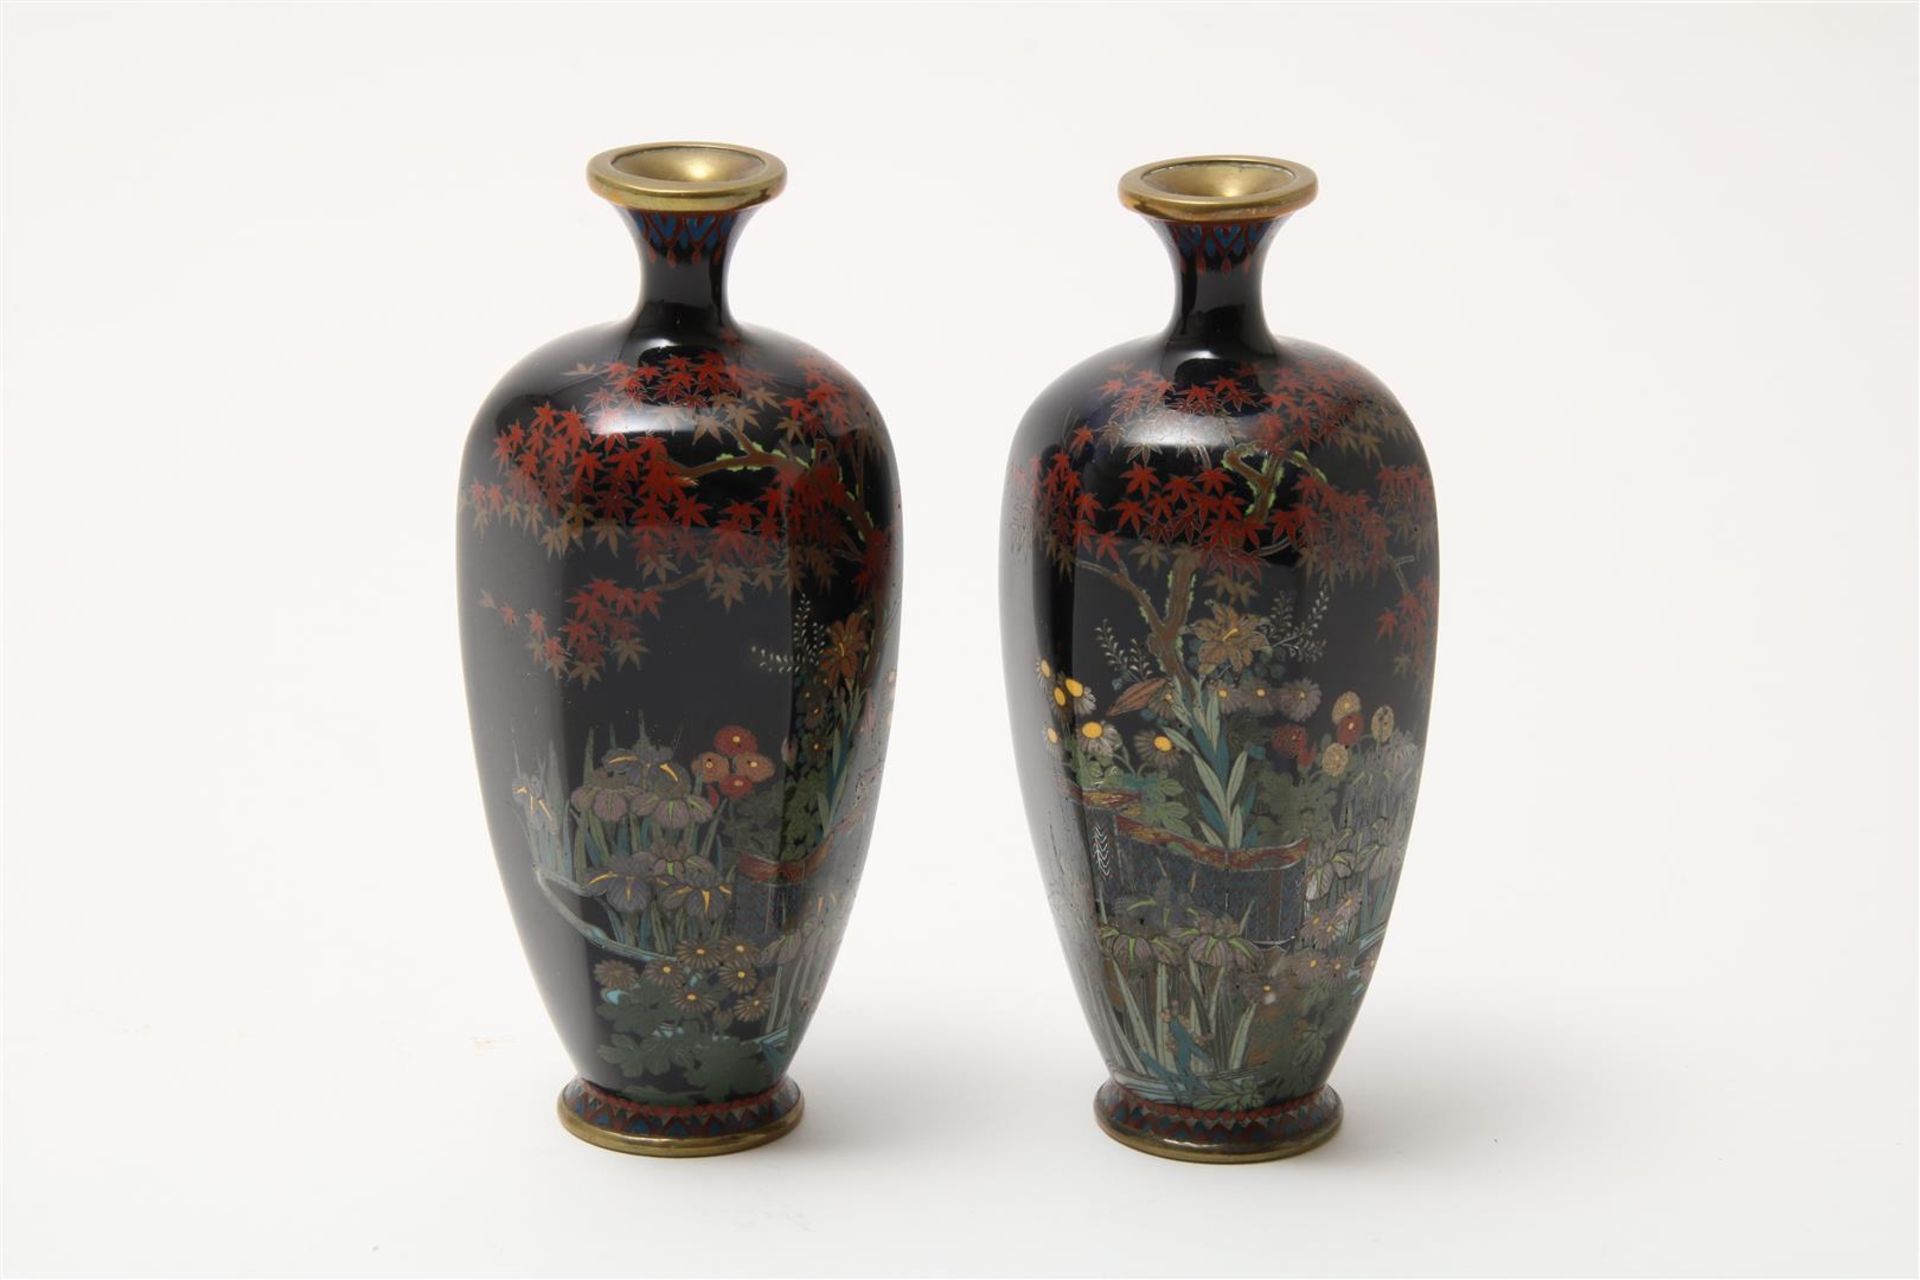 Pair of bronze vases inlaid with cloisonne